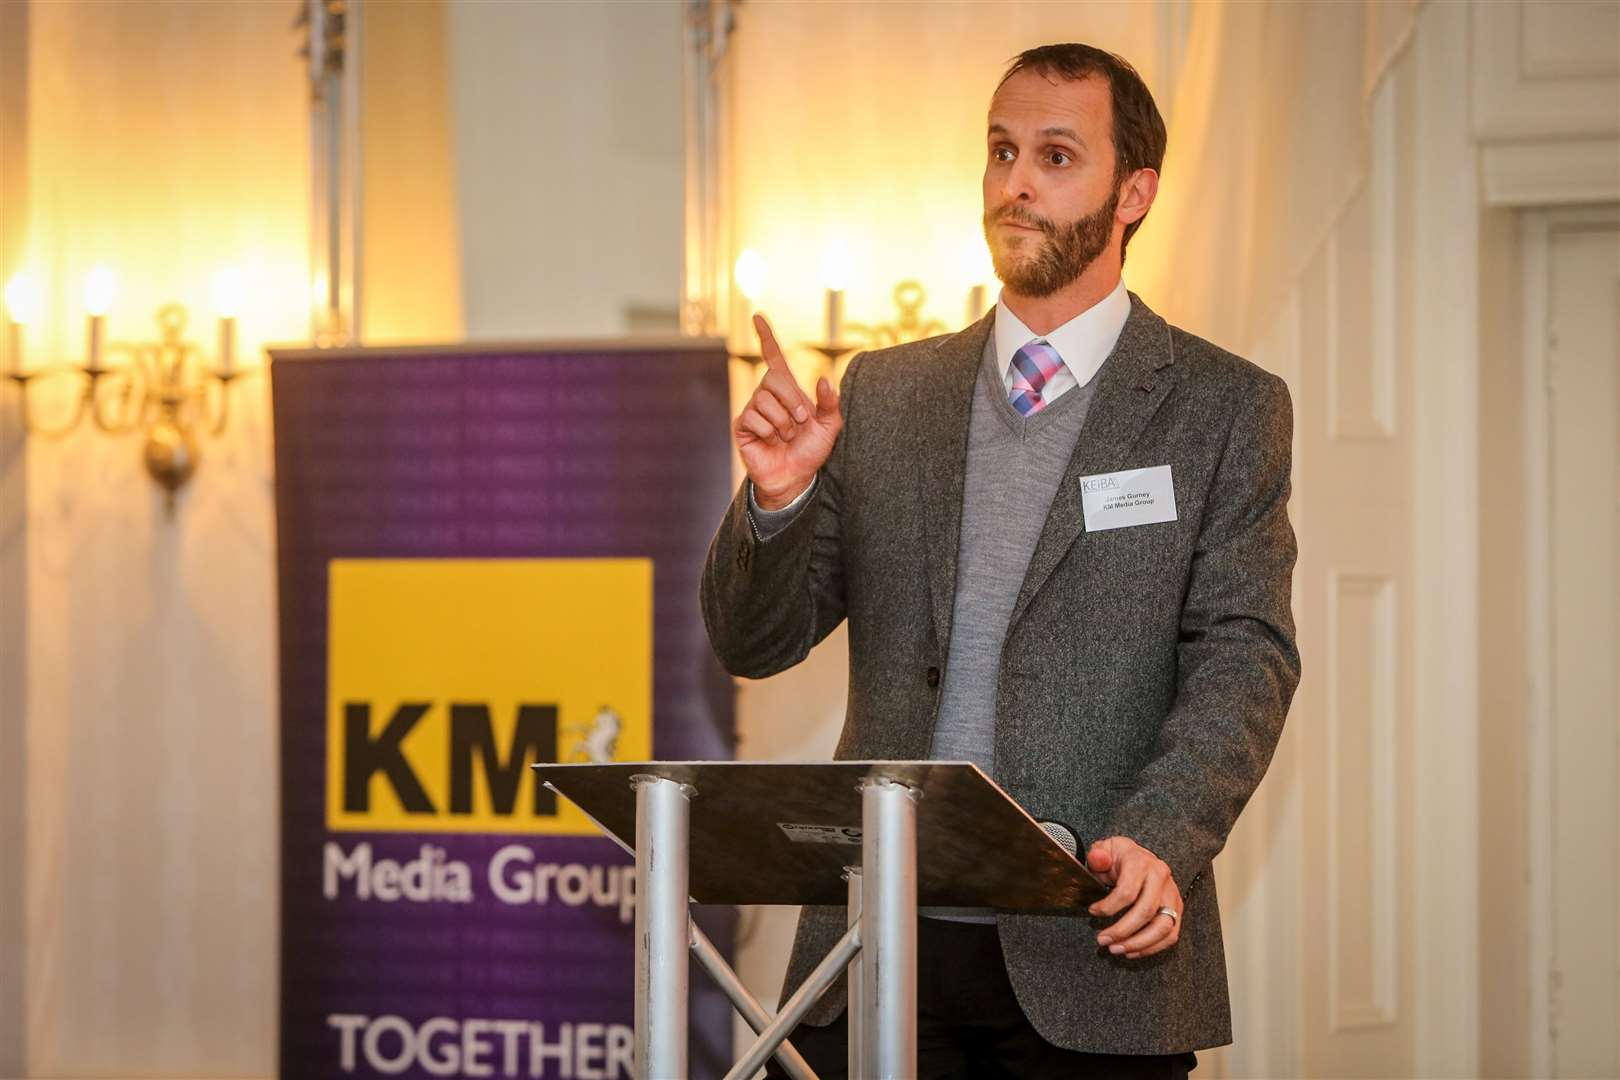 KM Media Group MD James Gurney has confirmed KEiBA 2020 has been cancelled